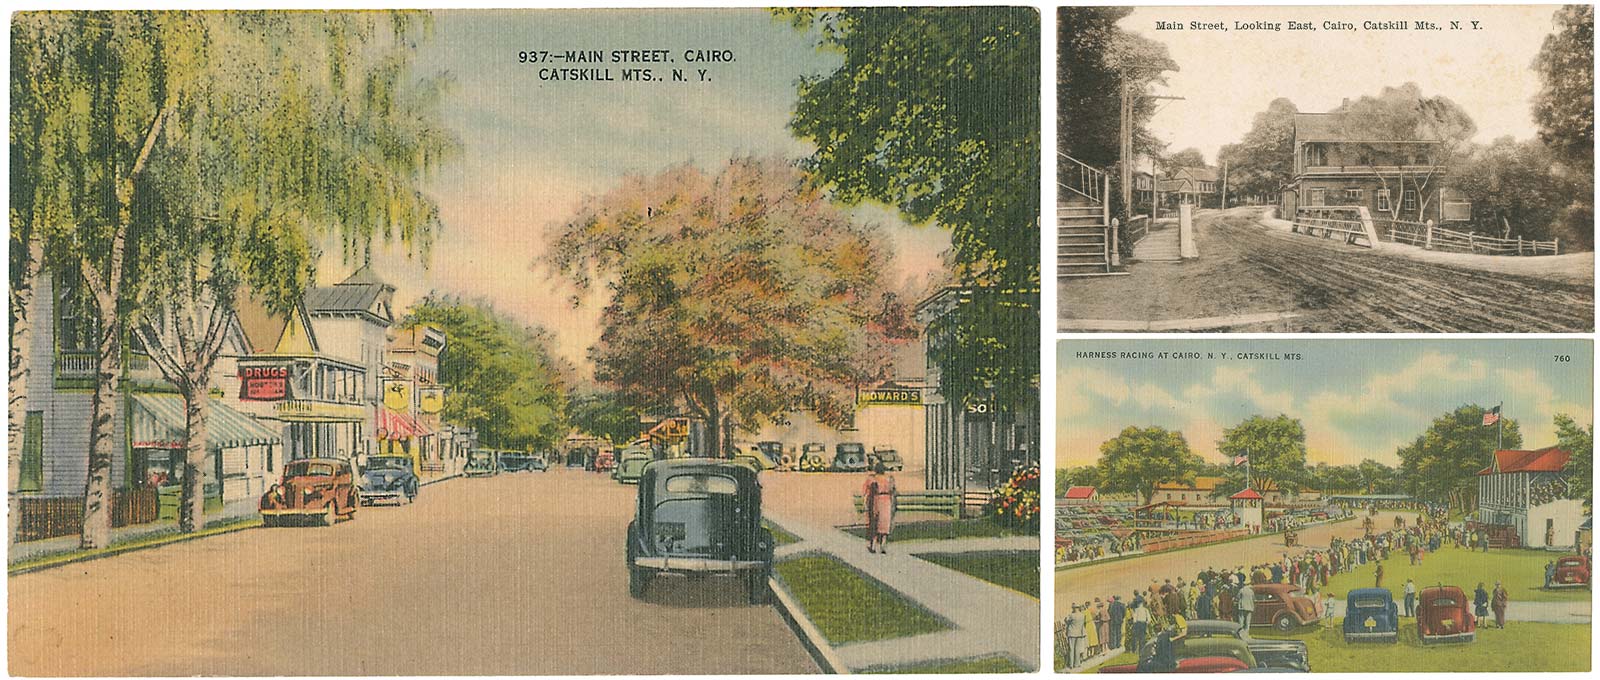 Two views of Main Street show Cairo, New York’s prosperity as the street became improved from the unpaved, rutted track at top right to the wide, paved thoroughfare in the linen-textured postcard, probably from the 1940s, at left. Cairo’s distance from New York City made it an ideal weekend trip for city dwellers of the time. Bottom right: A postcard shows harness racing at the track and fairgrounds that began hosting the county fair in 1870, where racing continued until 1961.